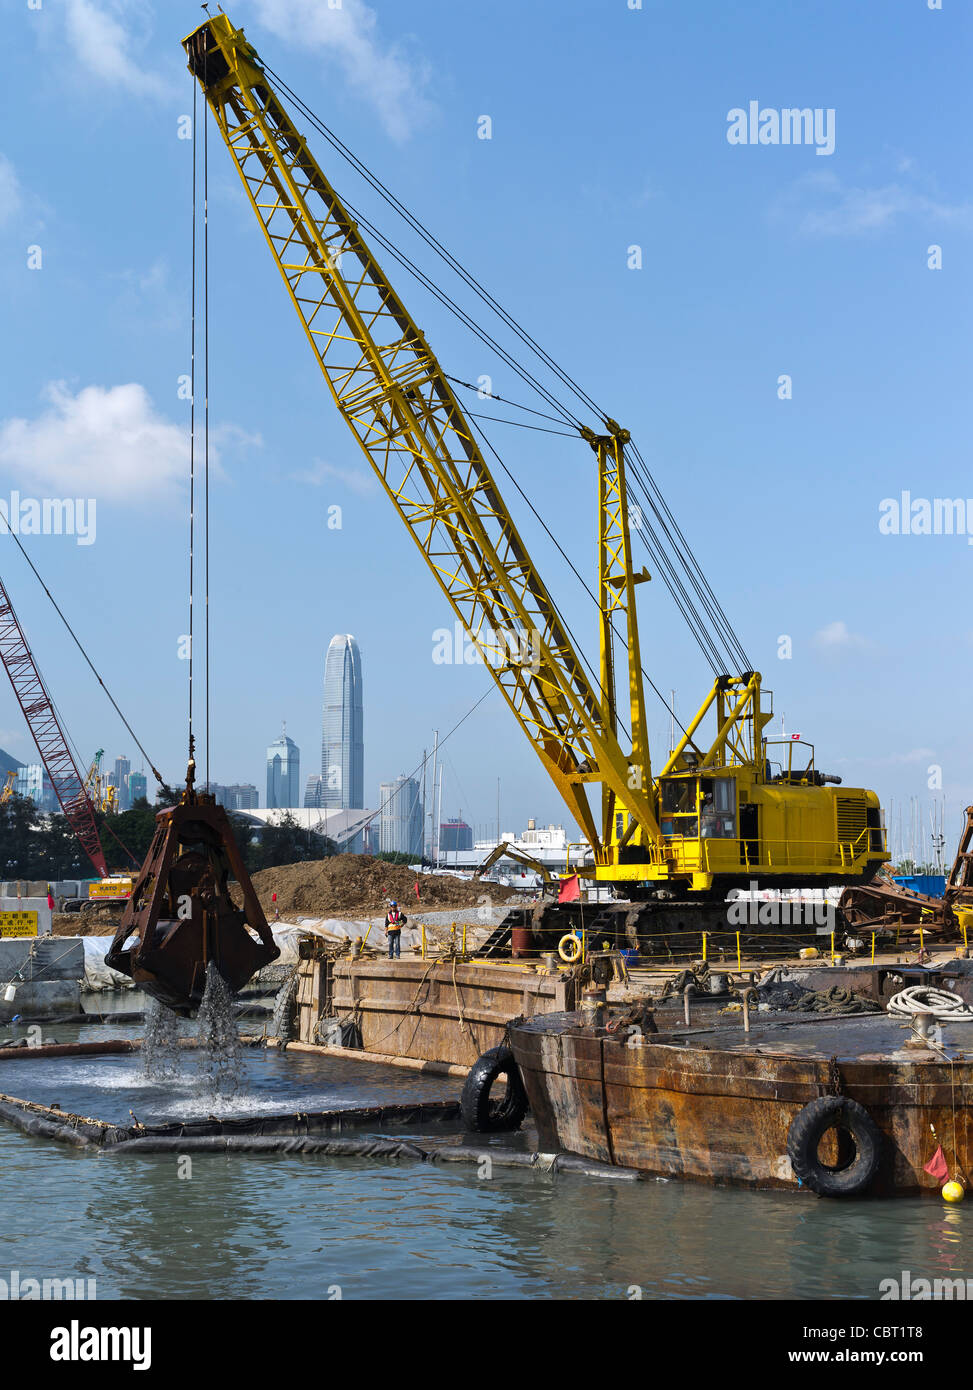 dh  CAUSEWAY BAY HONG KONG Cranes dredging harbour reclaiming land for Central Wan Chai bypass road engineering harbor reclamation construction china Stock Photo